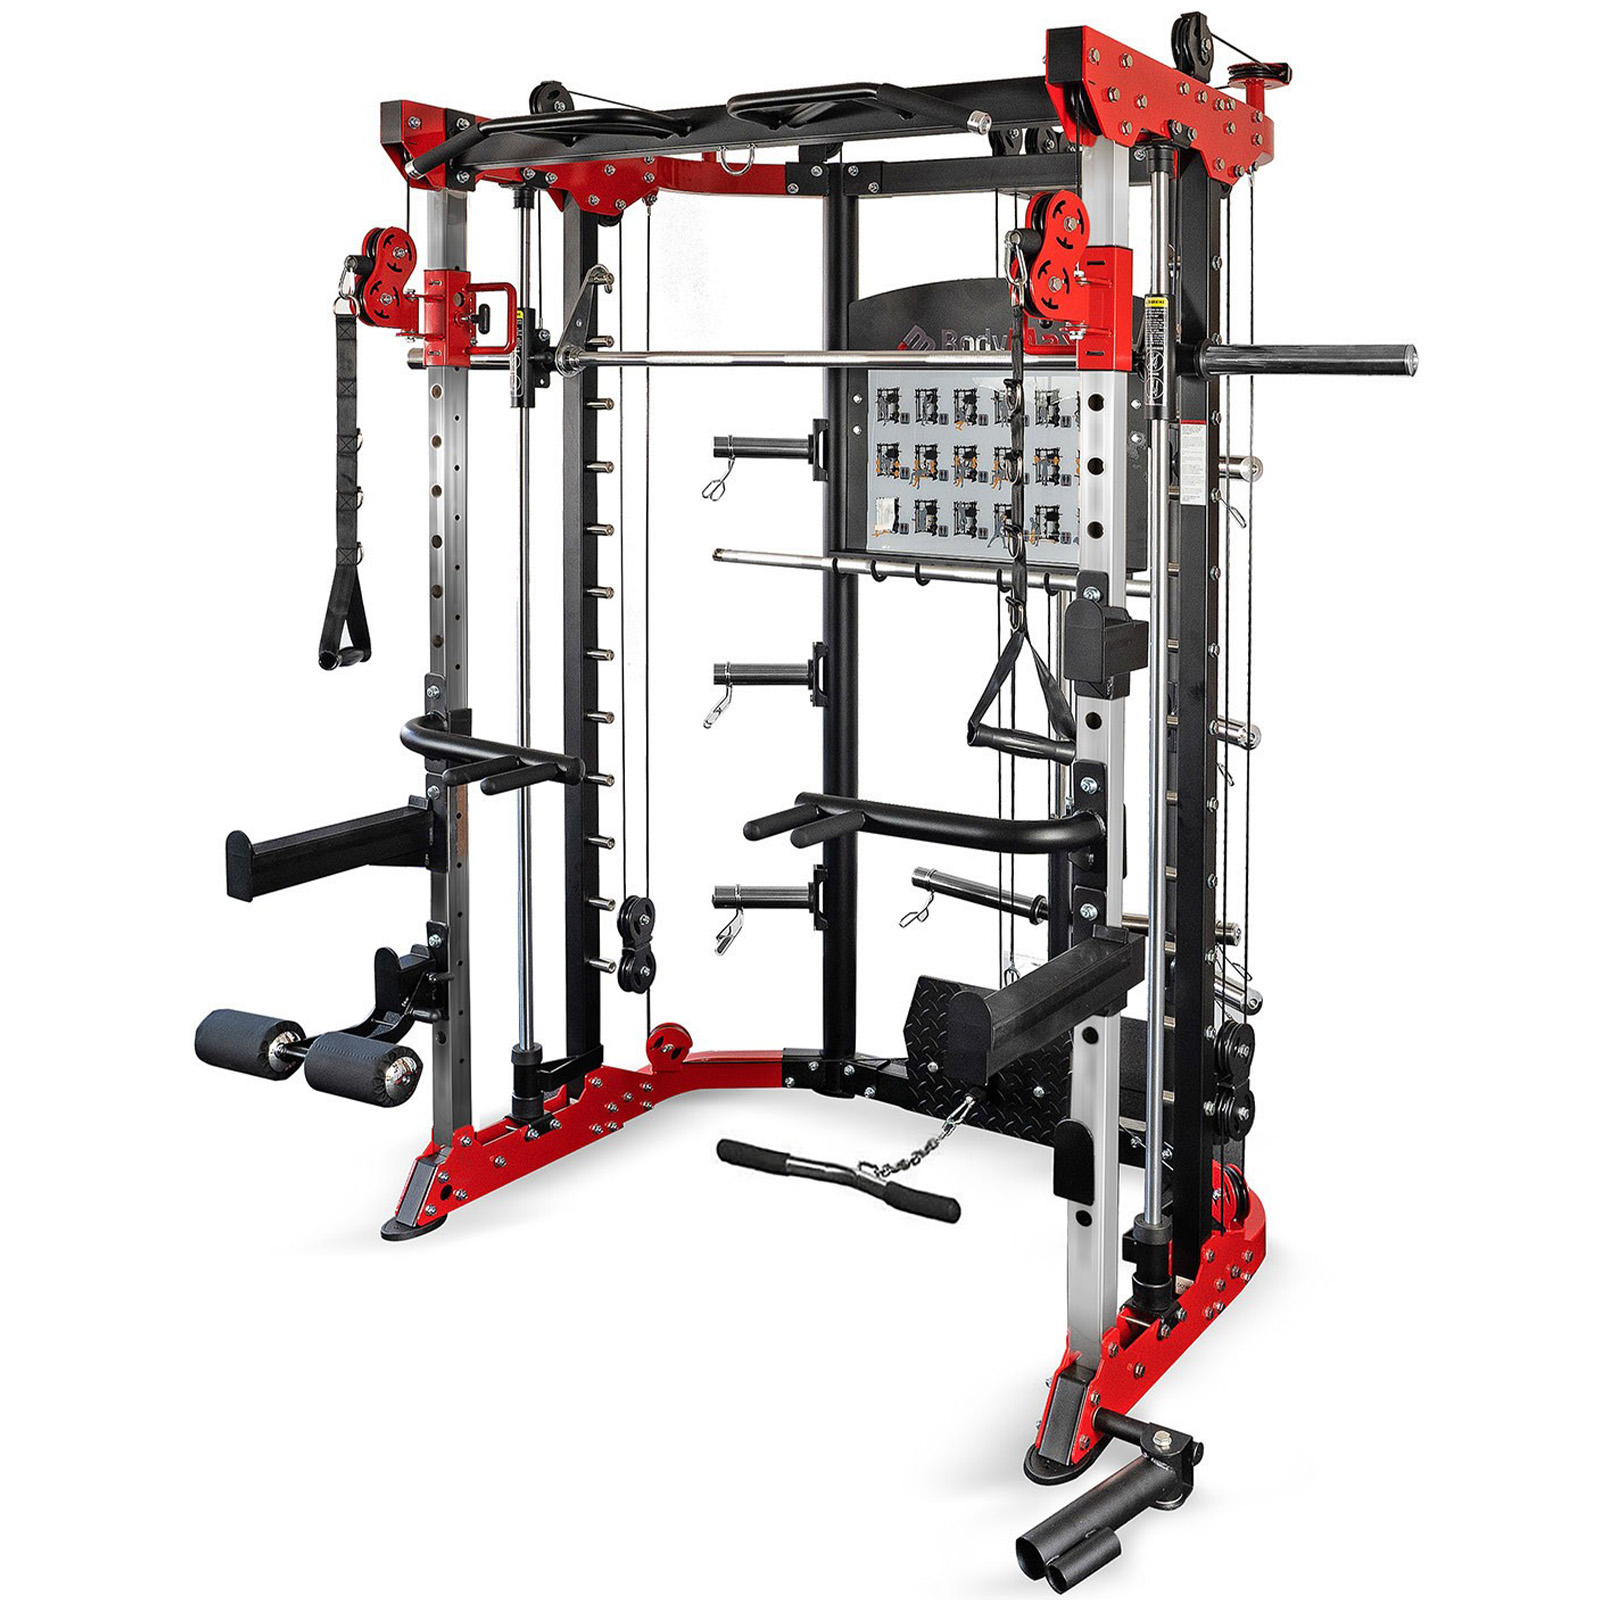 Does an Angled or Vertical Smith Machine Suit Your Needs